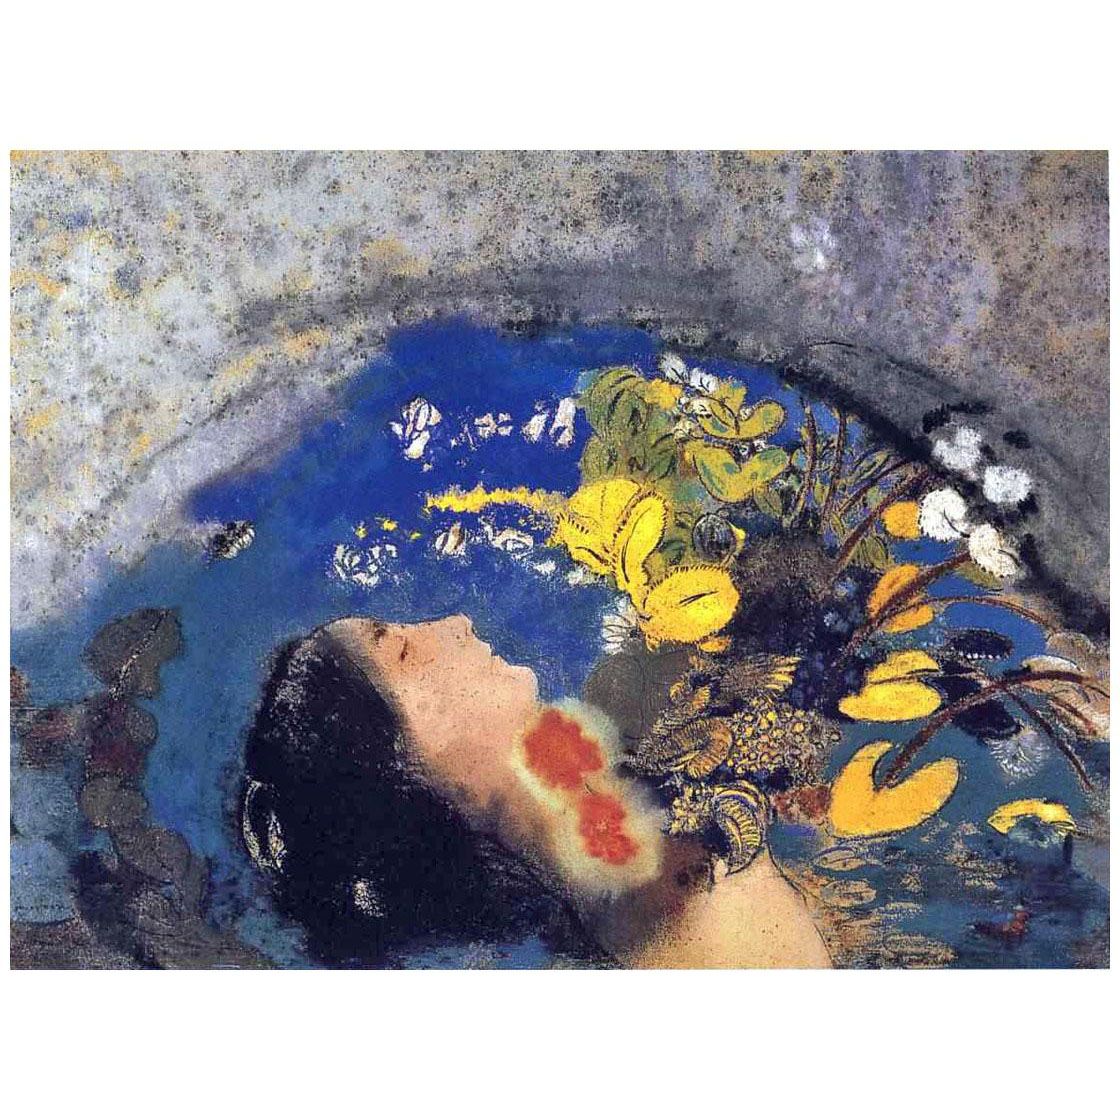 Odilon Redon. Ophelie. 1900-1905. Private collection